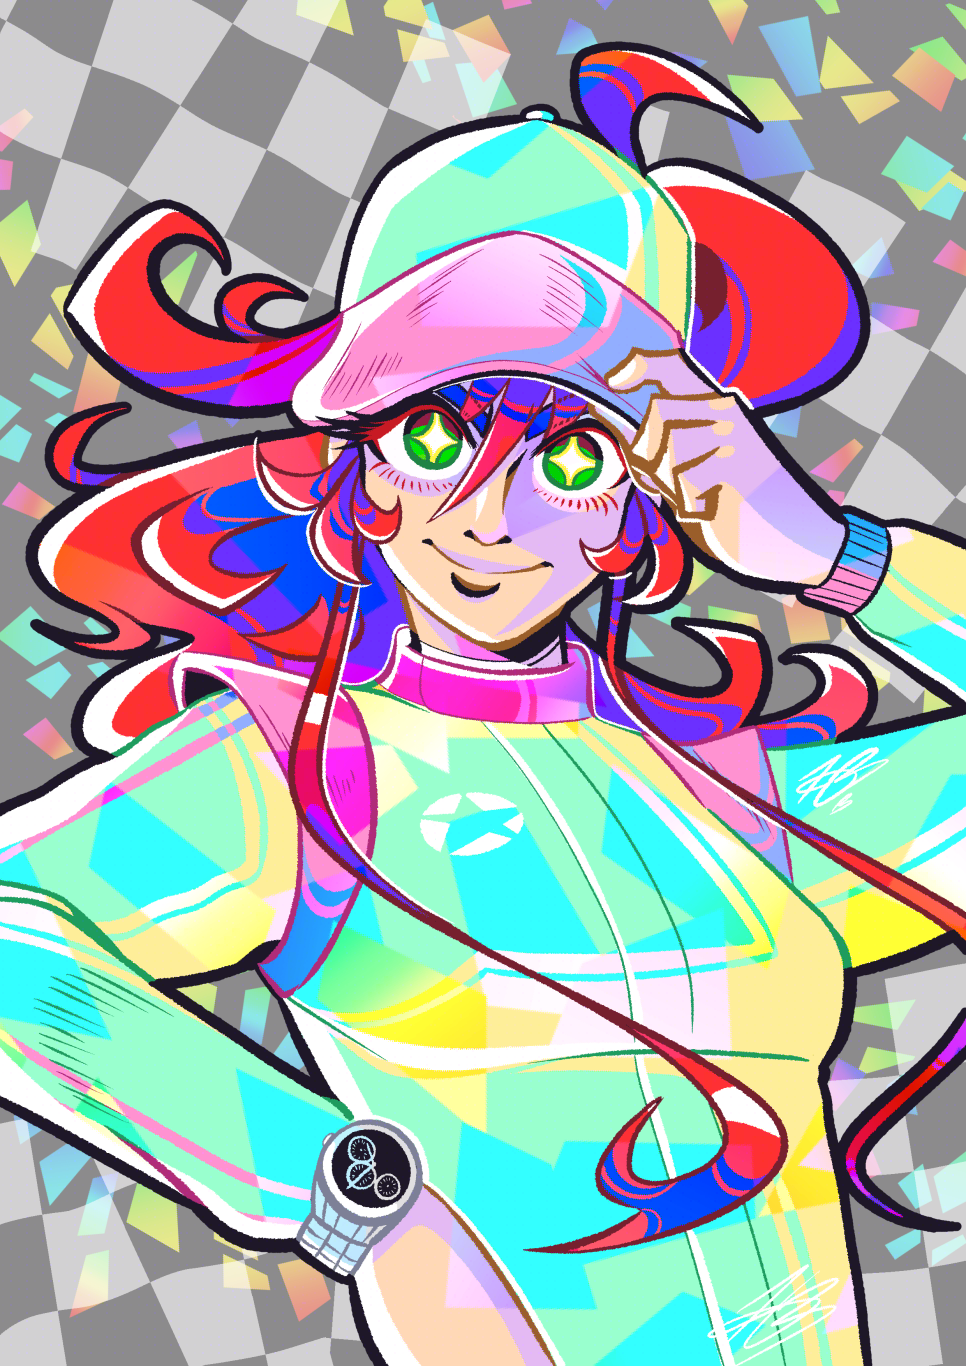 A stylistic, anime digital illustration of my character Tiffany from my comic Paradiso. It's illustrated with bold lines and a lot of solid, multi-colour areas. She is wearing her race suit which is mostly turquoise with some pink, and is wearing a turquoise cap with a pink brim, which she holds onto. She wears a silver sports watch on her other hand, and her red hair is tied up in a ponytail. There's multi-coloured confetti in the background with a white and grey chequered pattern.